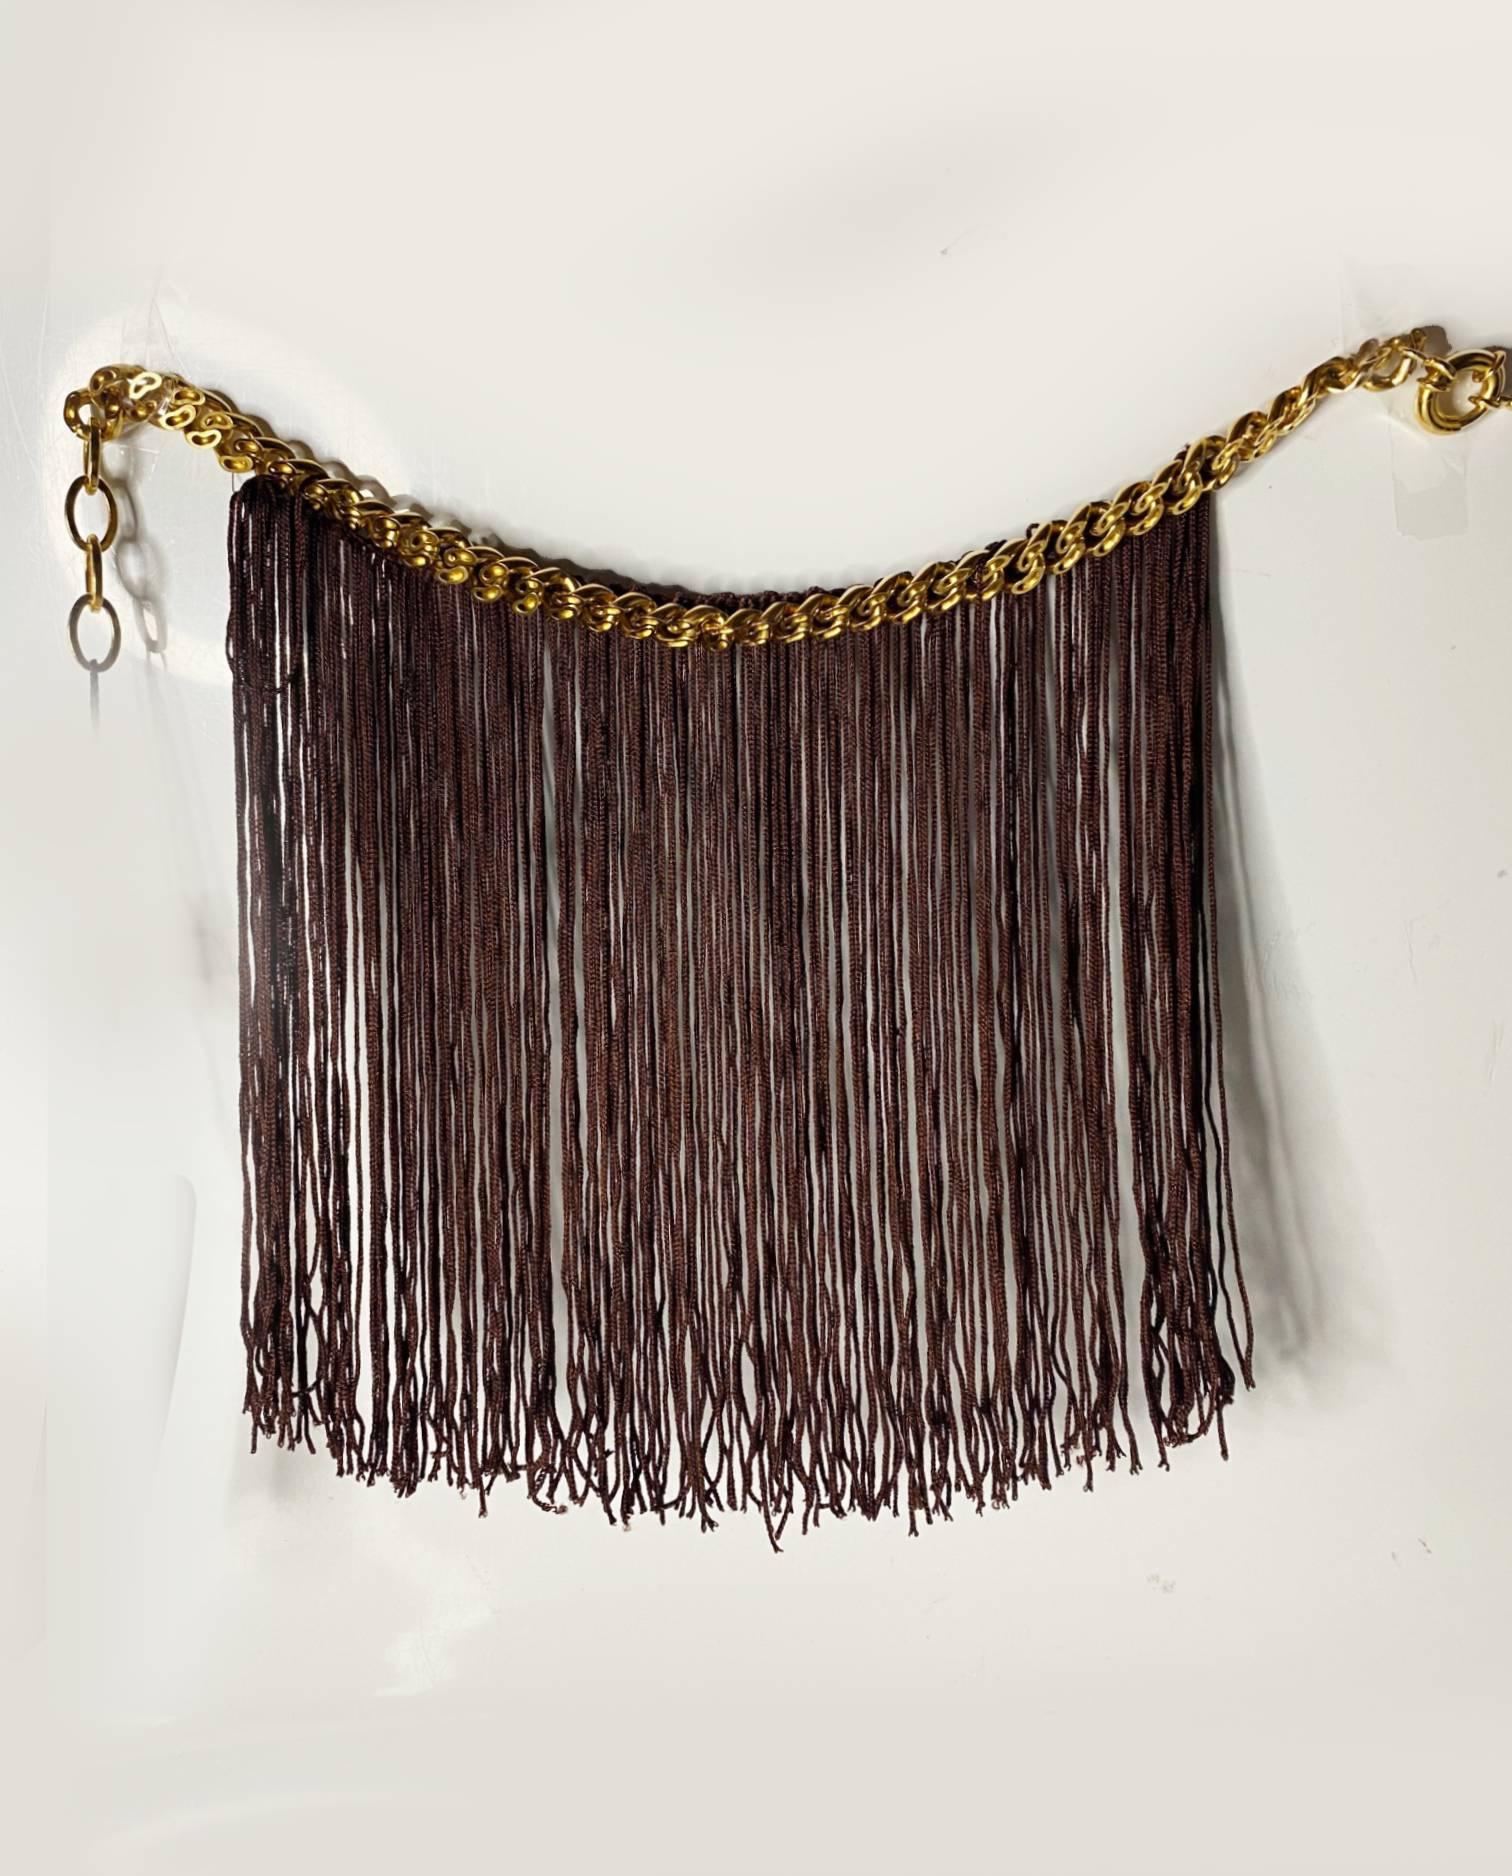 Missoni Brown Fringe Gold Metal Choker Necklace This timeless design is crafted from enduring gold metal, showcasing a modern fringe texture. It's an effortless way to upgrade any outfit and elevate your style

Condition: new with